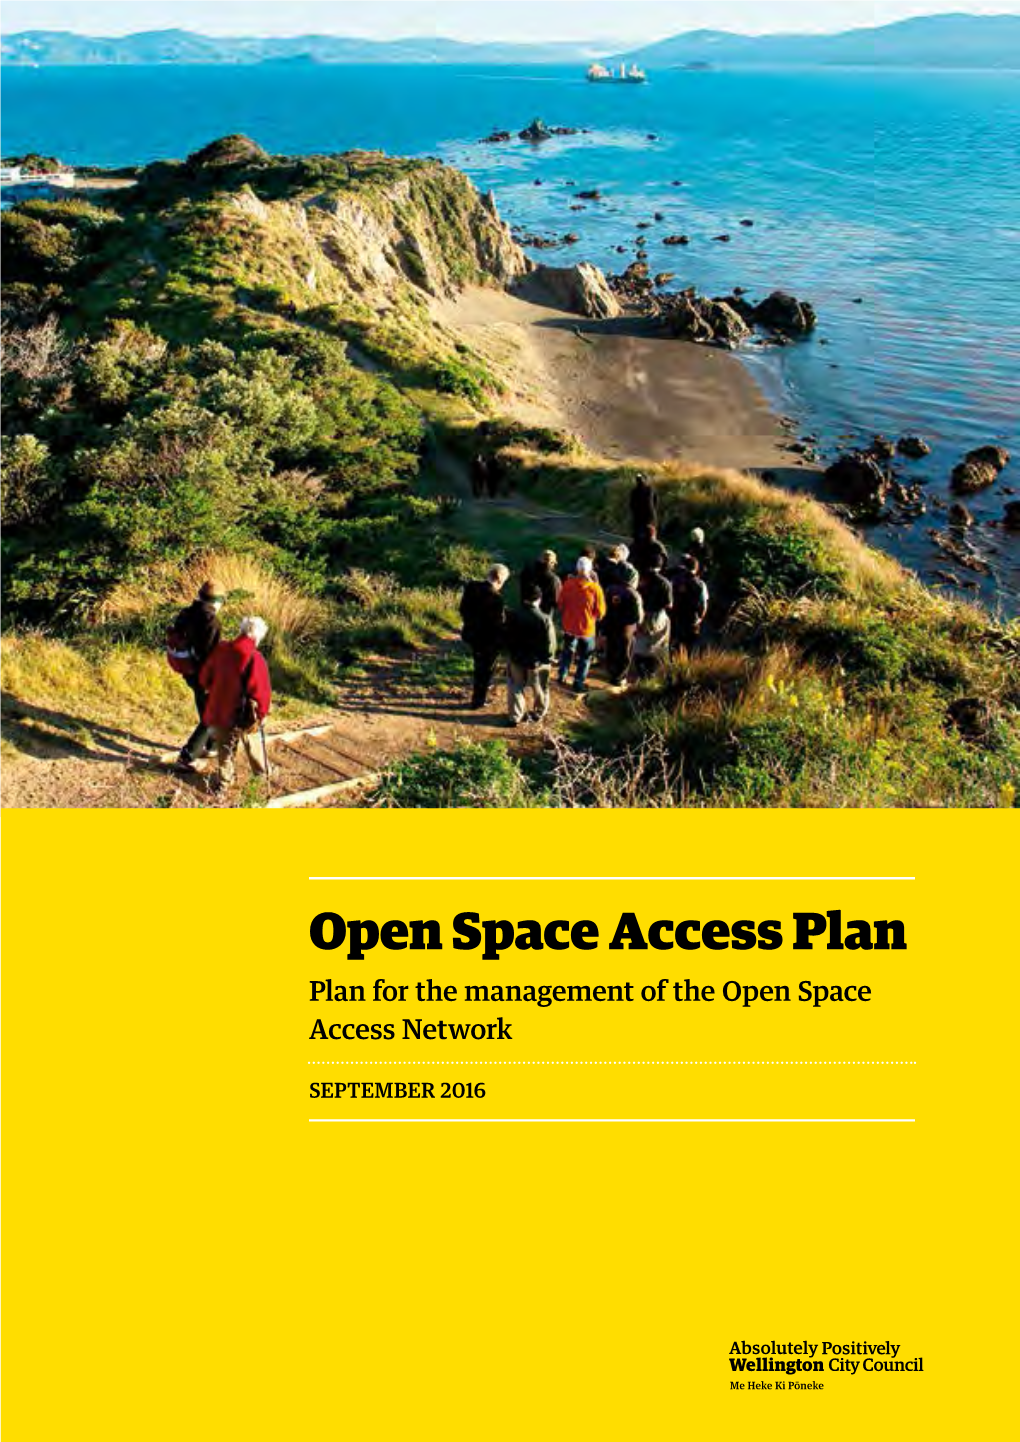 Open Space Access Plan Plan for the Management of the Open Space Access Network